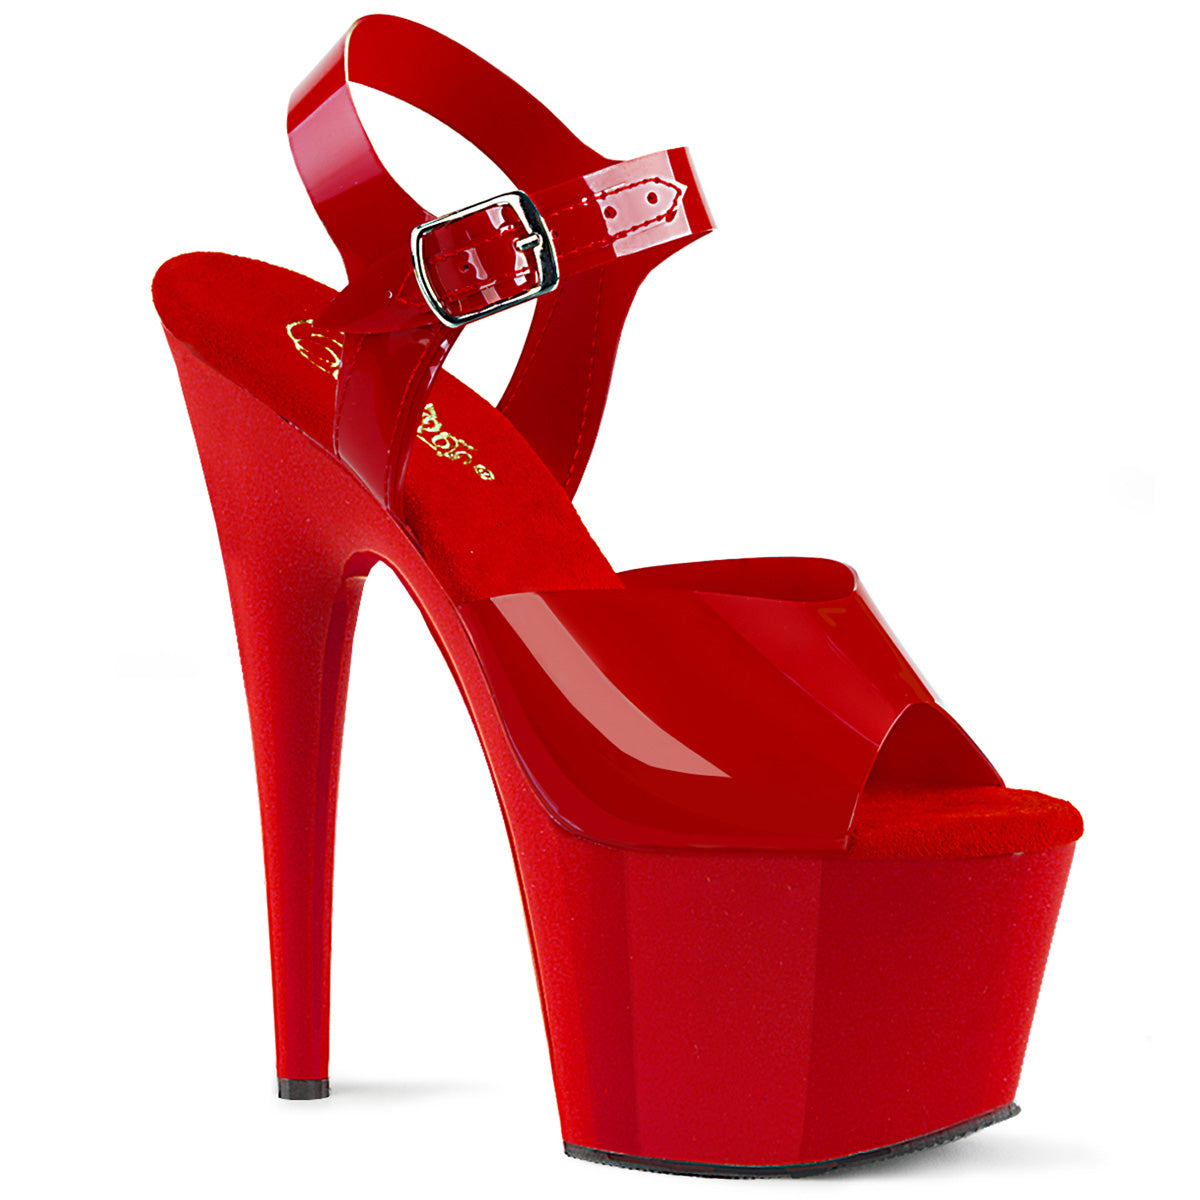 ADORE-708N Pleaser Sexy 7 Inch Heel Red Pole Dancer Shoes-Pleaser- Sexy Shoes